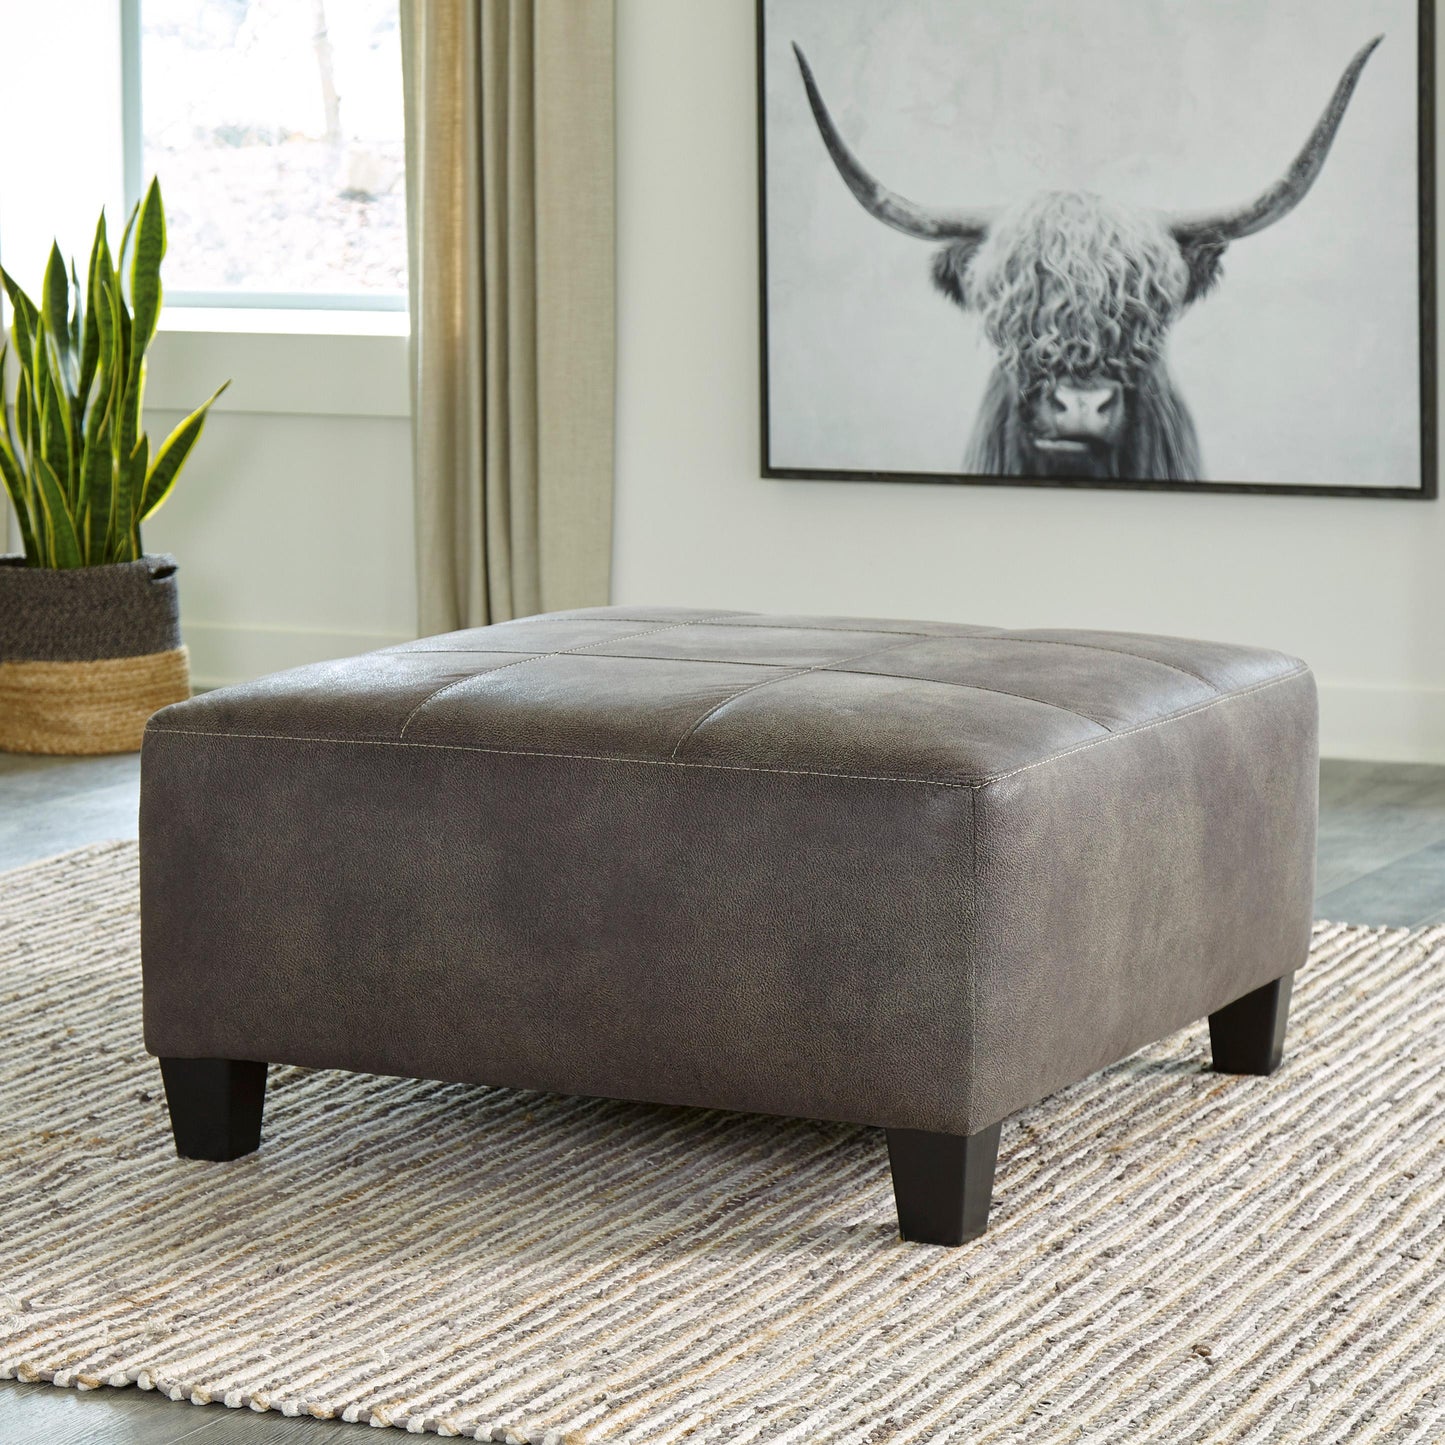 Signature Design by Ashley Navi Leather Look Ottoman 9400208